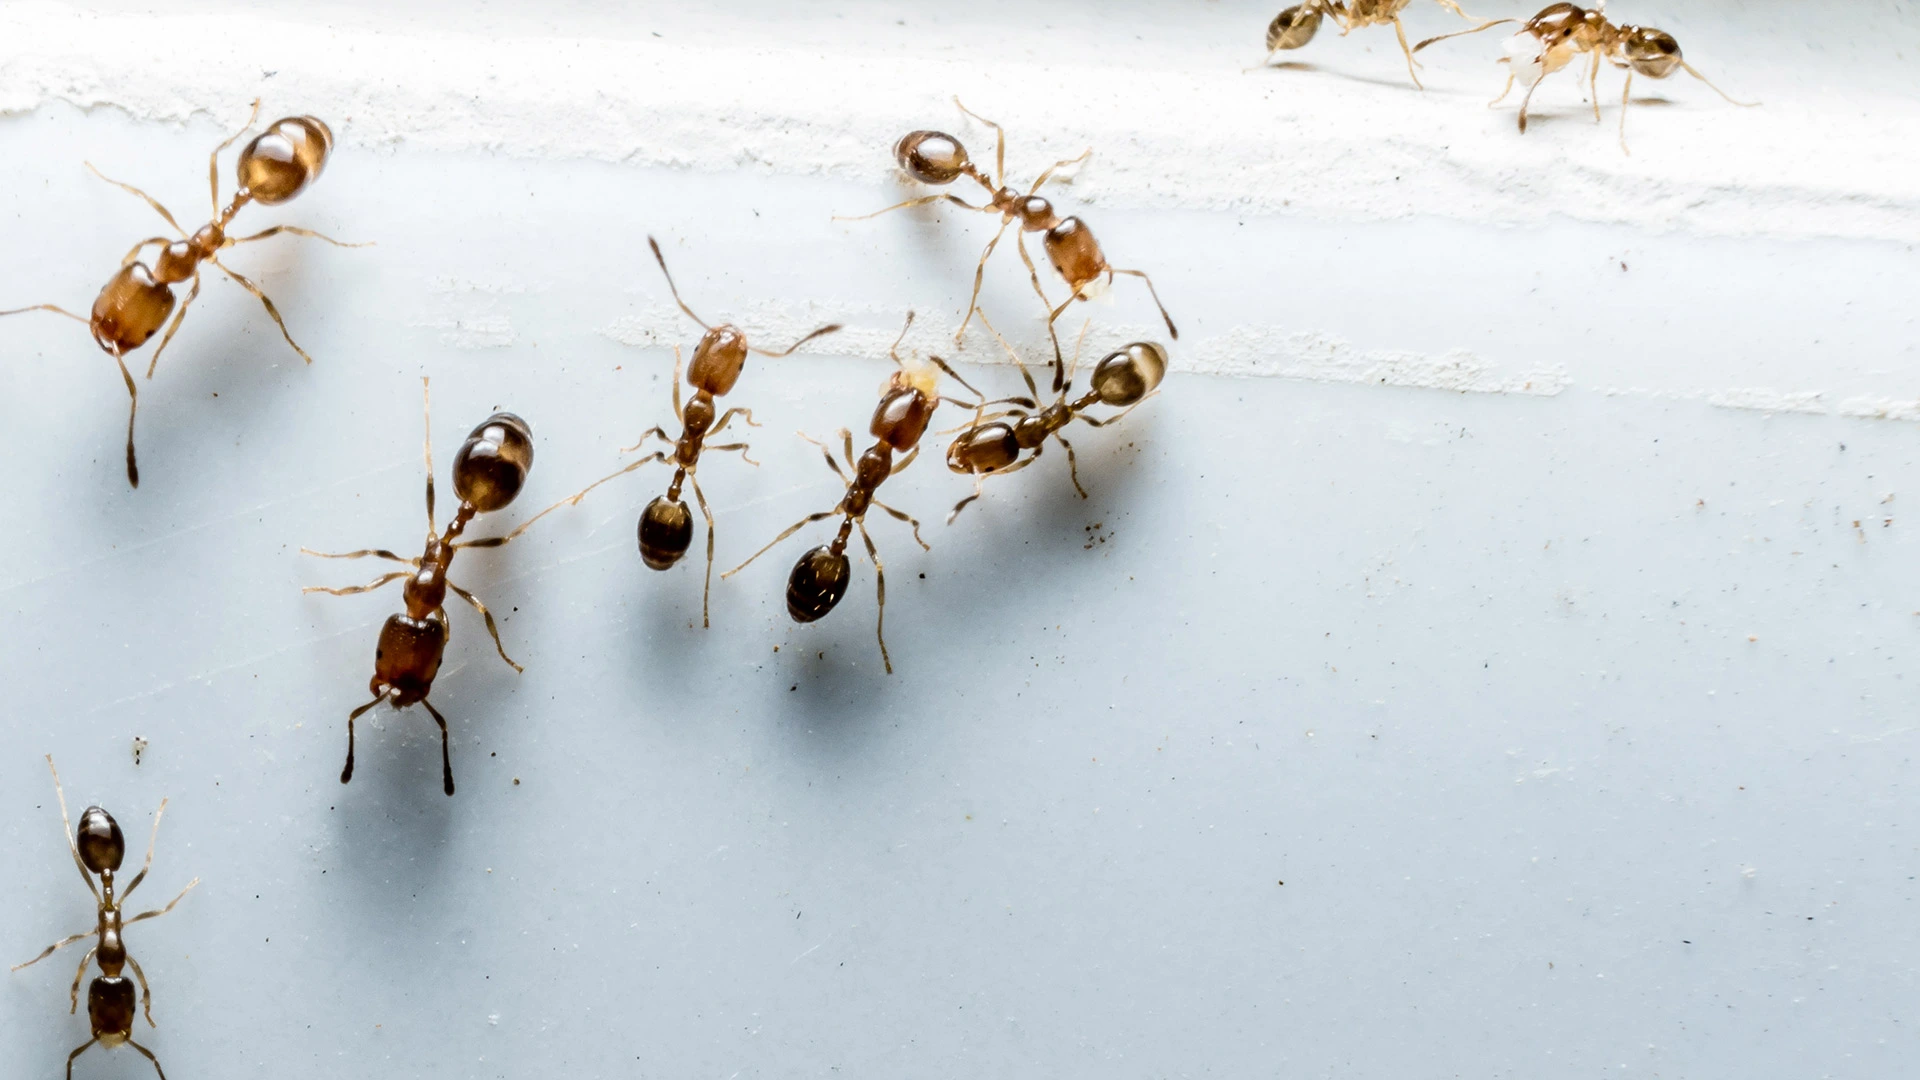 Are Ants Invading Your Home or Business? Here’s What You Should Do